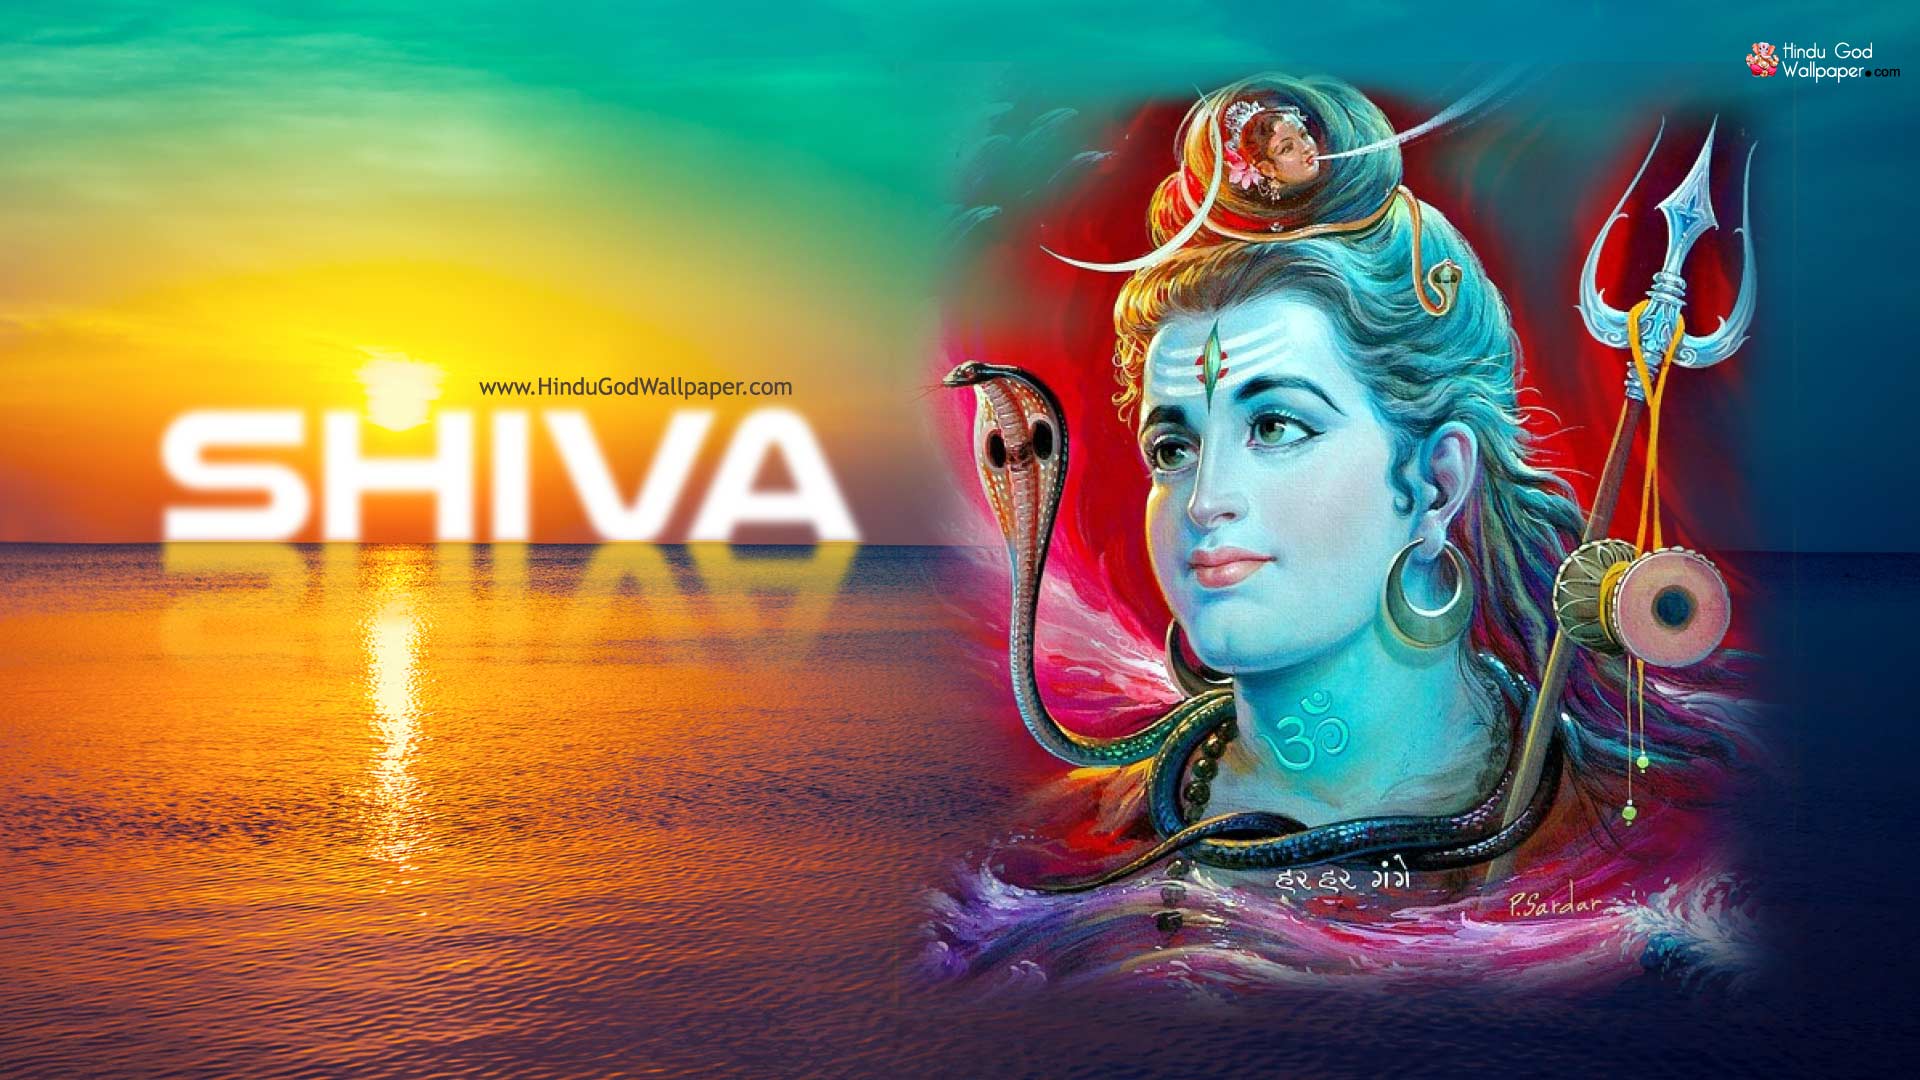 Lord Shiva Wallpapers, HD Images, Photos, Pictures Free Download